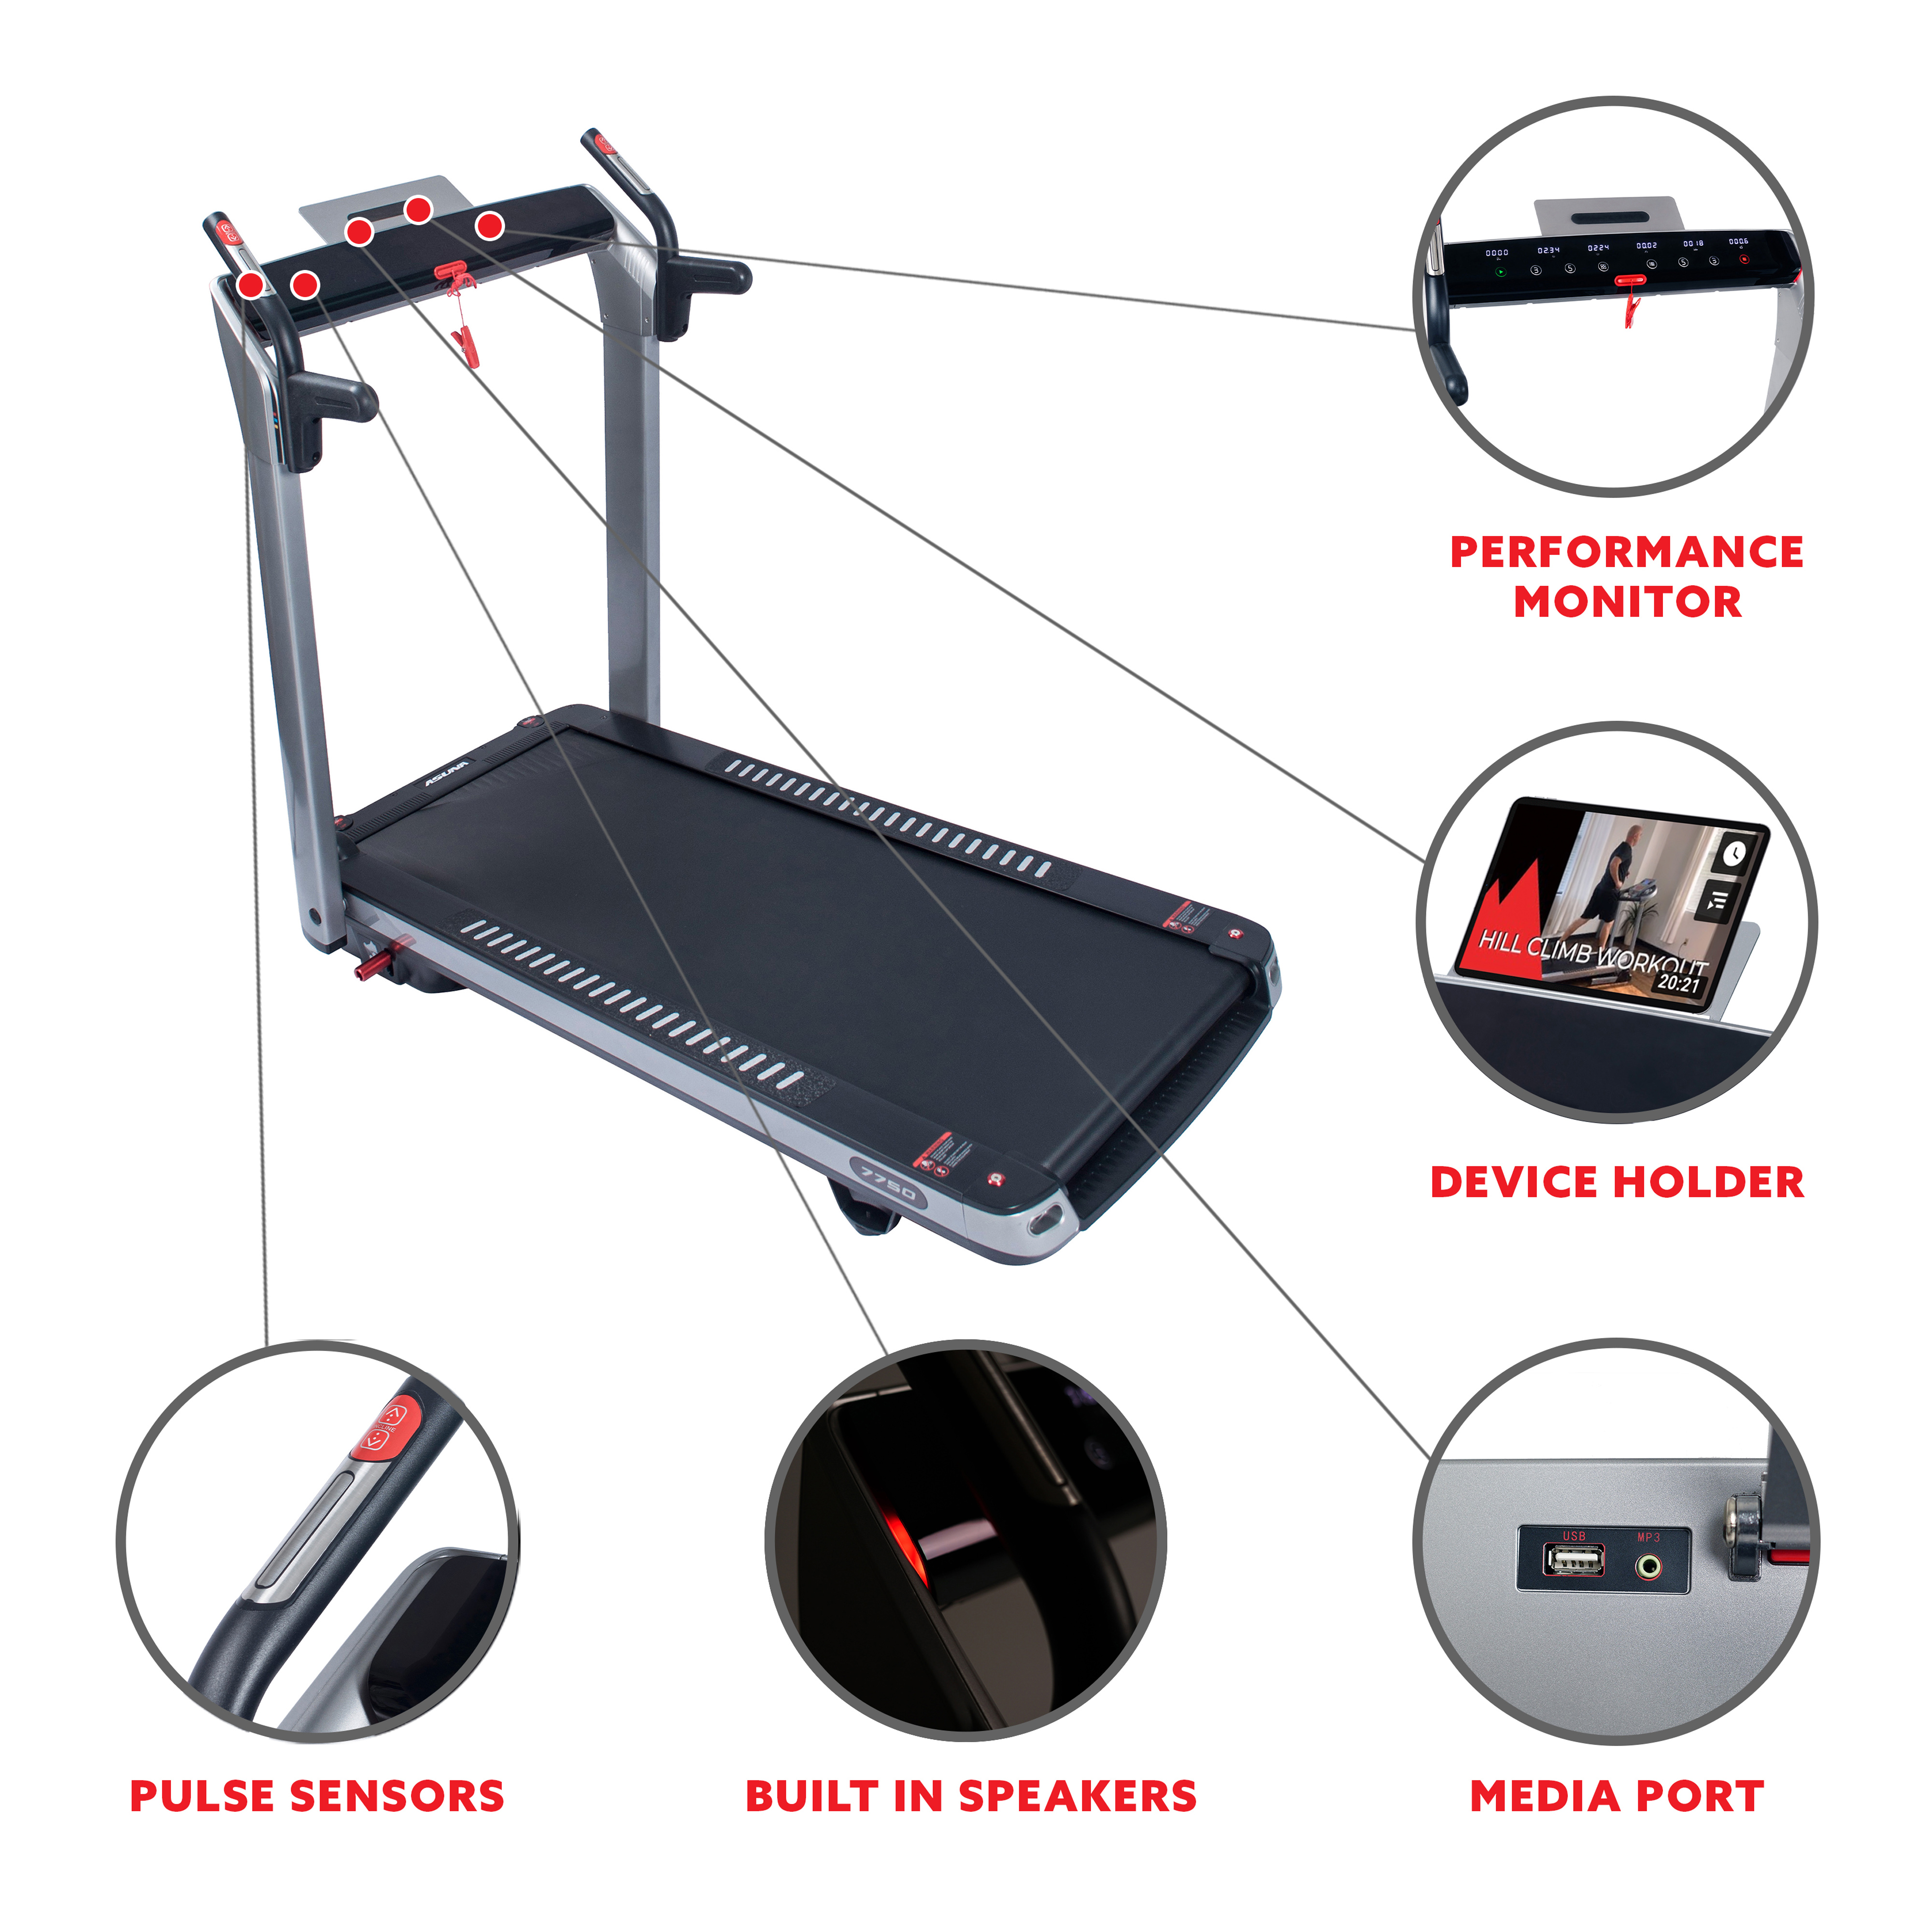 ASUNA 7750 Spaceflex Motorized Foldable Treadmill with Speakers, 6 LED Displays, 220 lb Max Weight - image 3 of 9